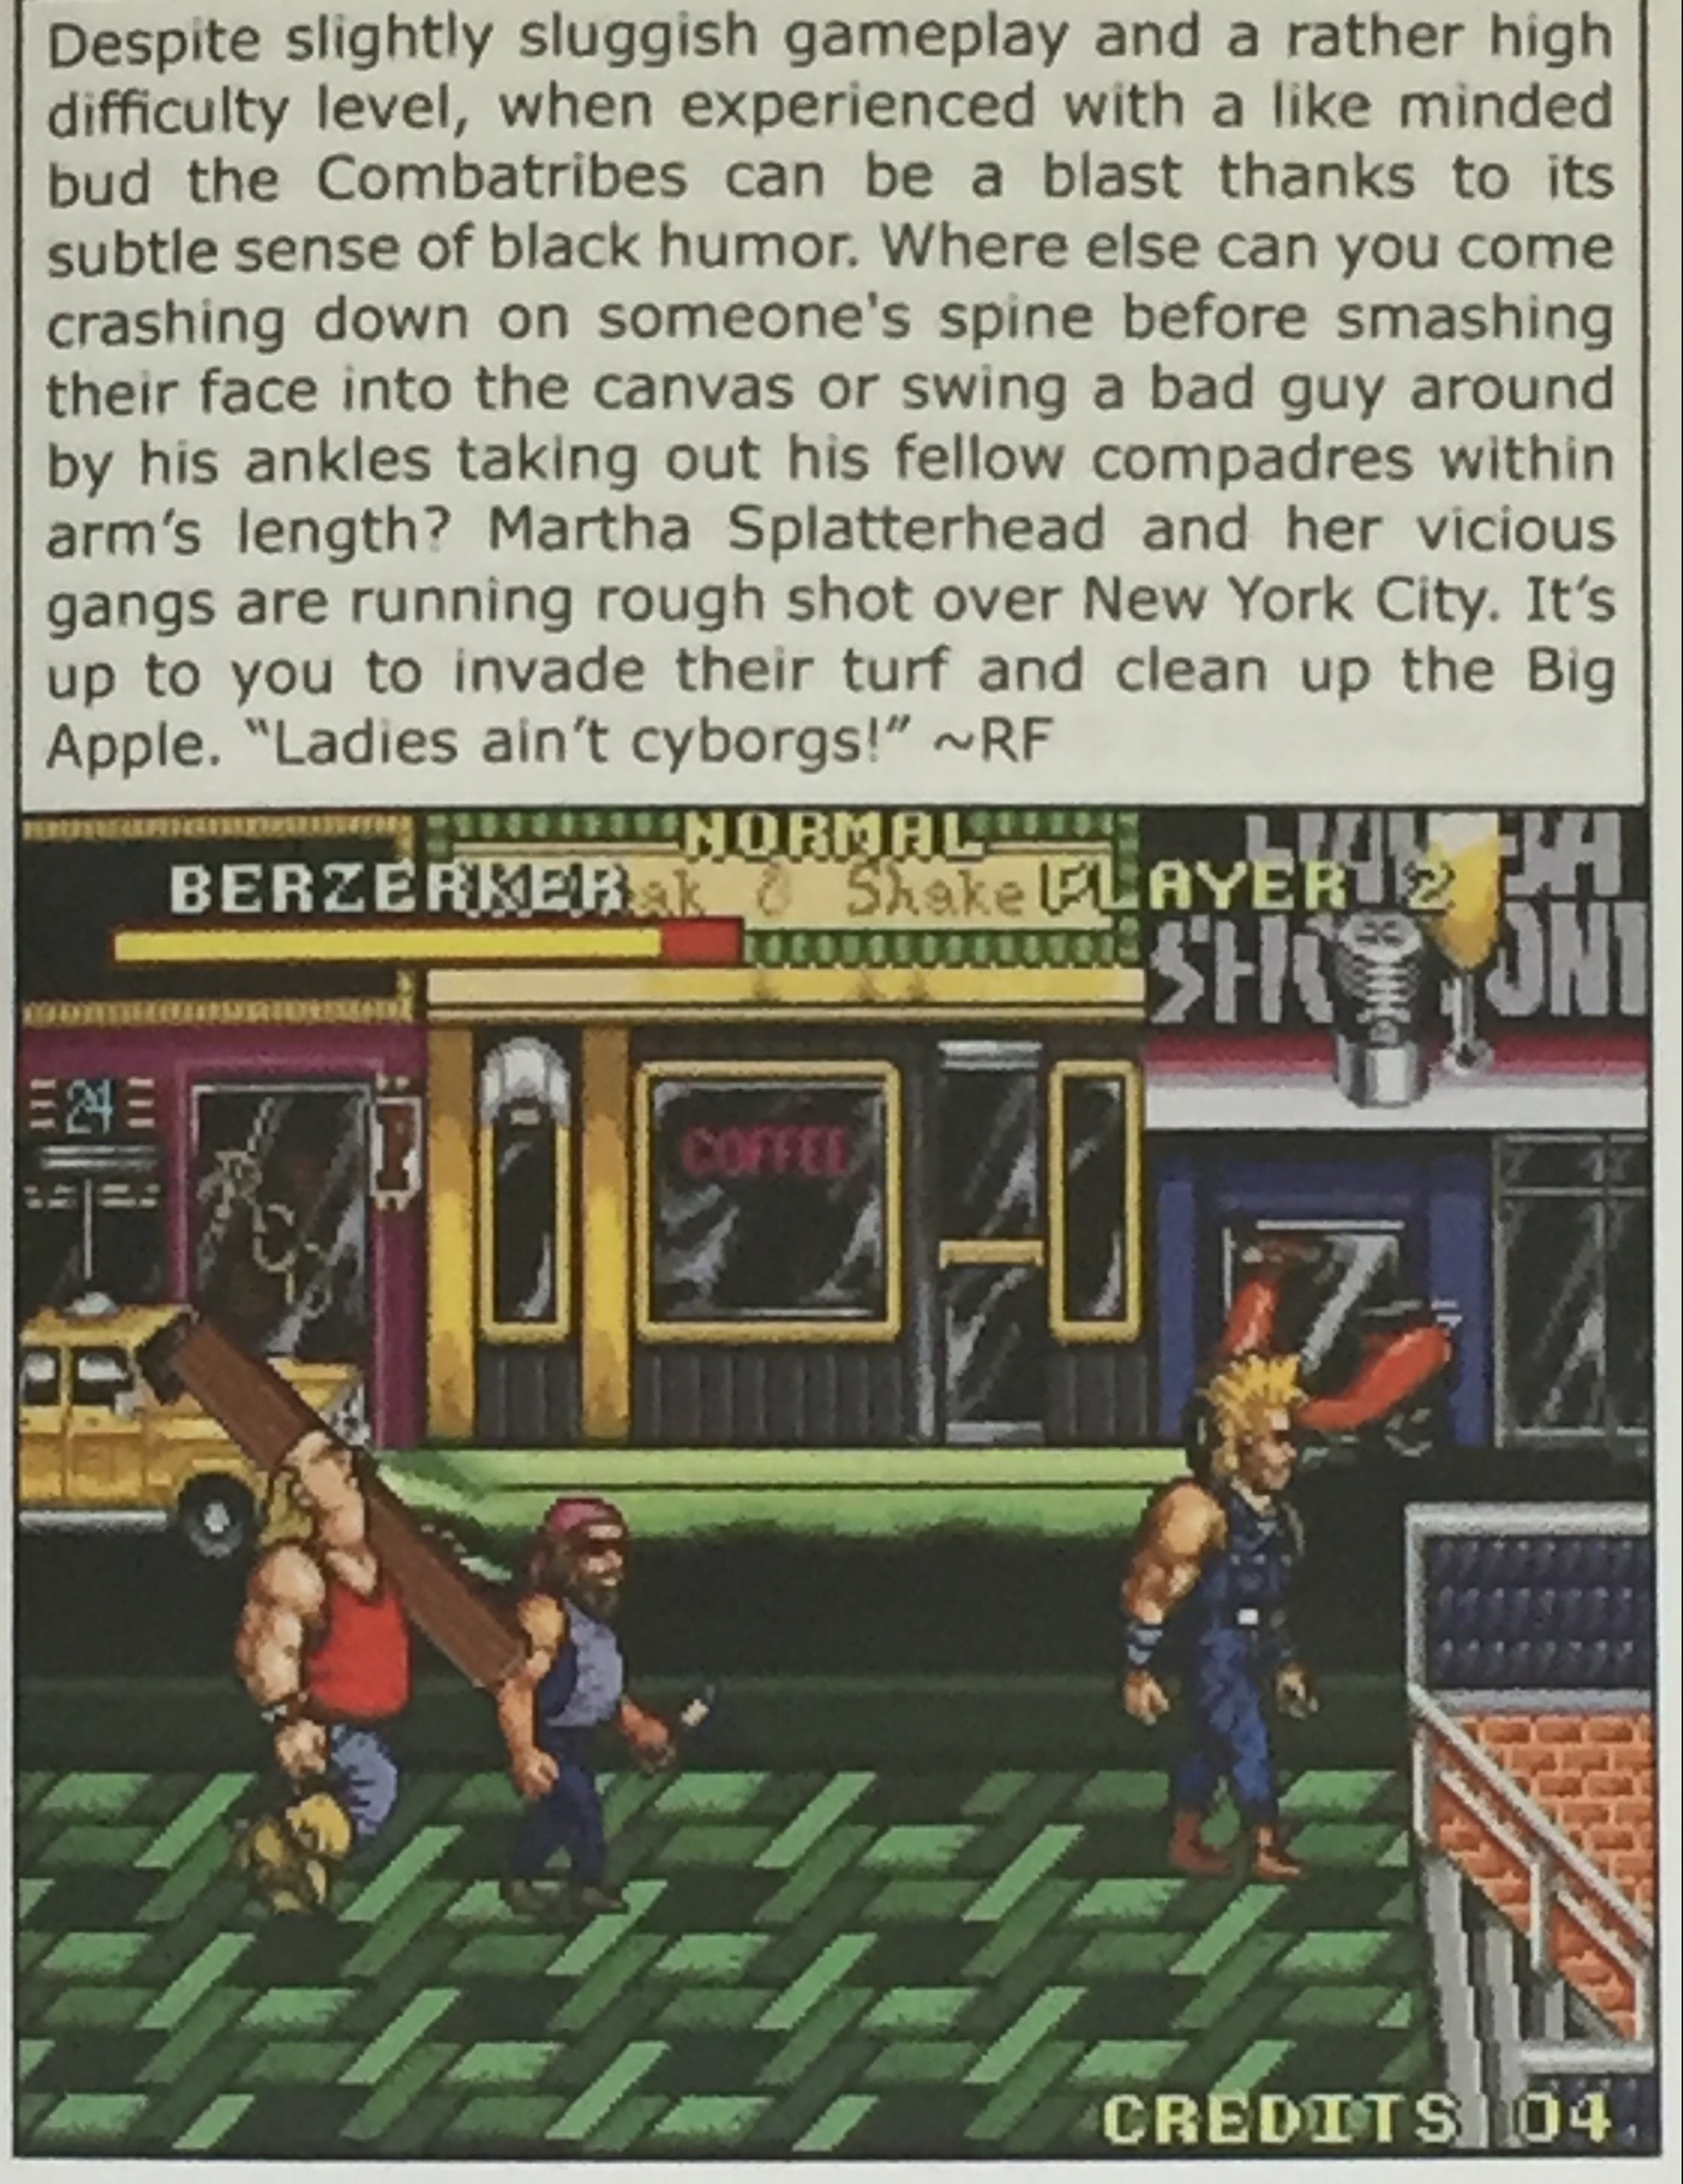 My summary of Combatribes in an SNES book